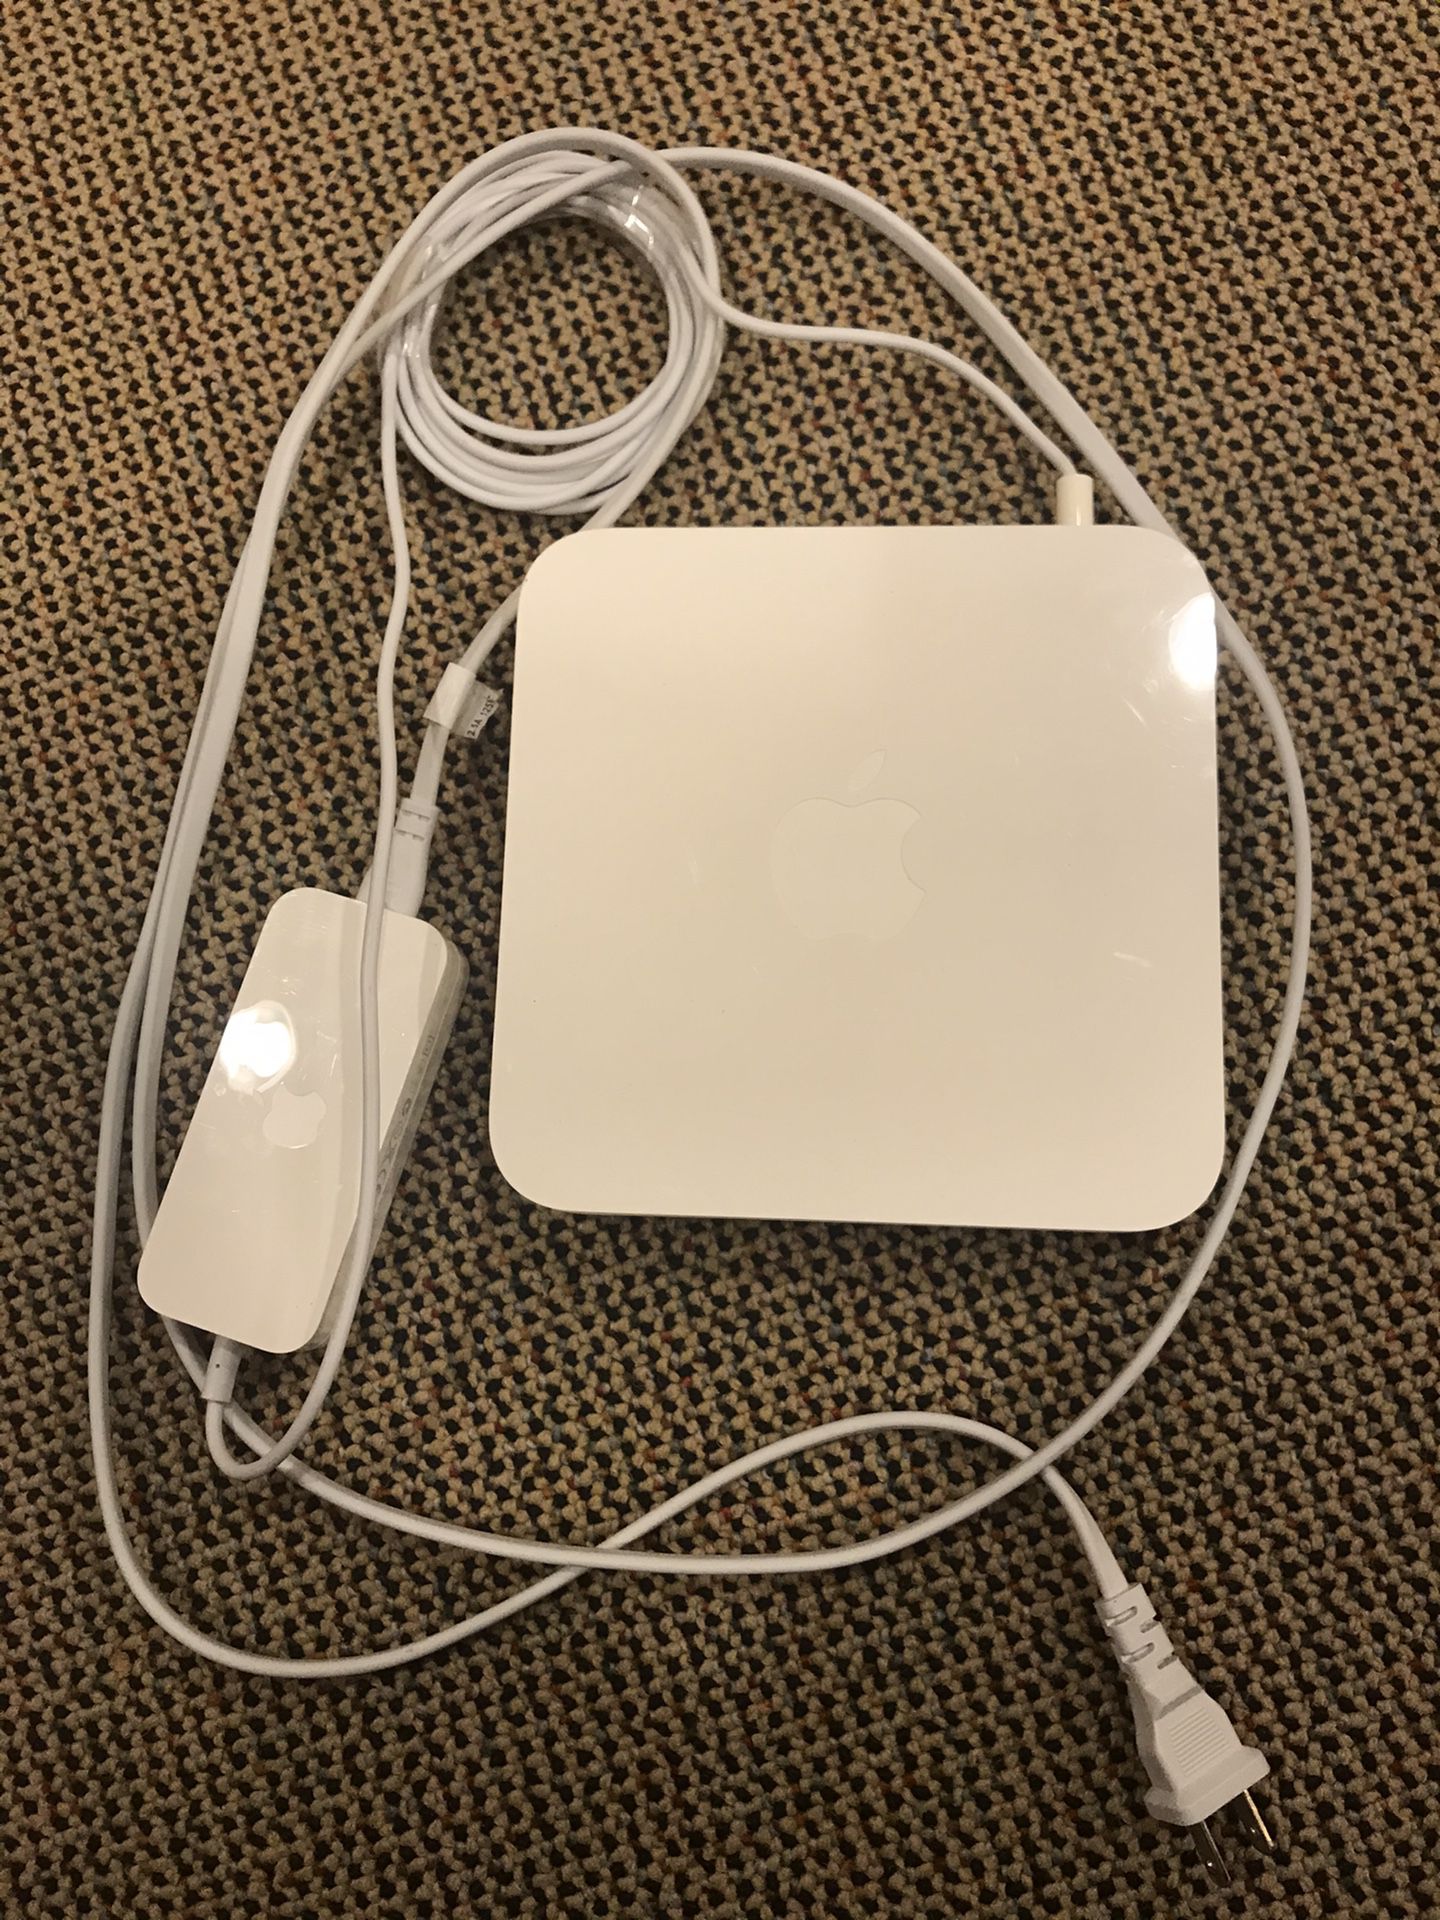 Apple Airport Extreme Model A1301 Base Station Router + Cable- OBO